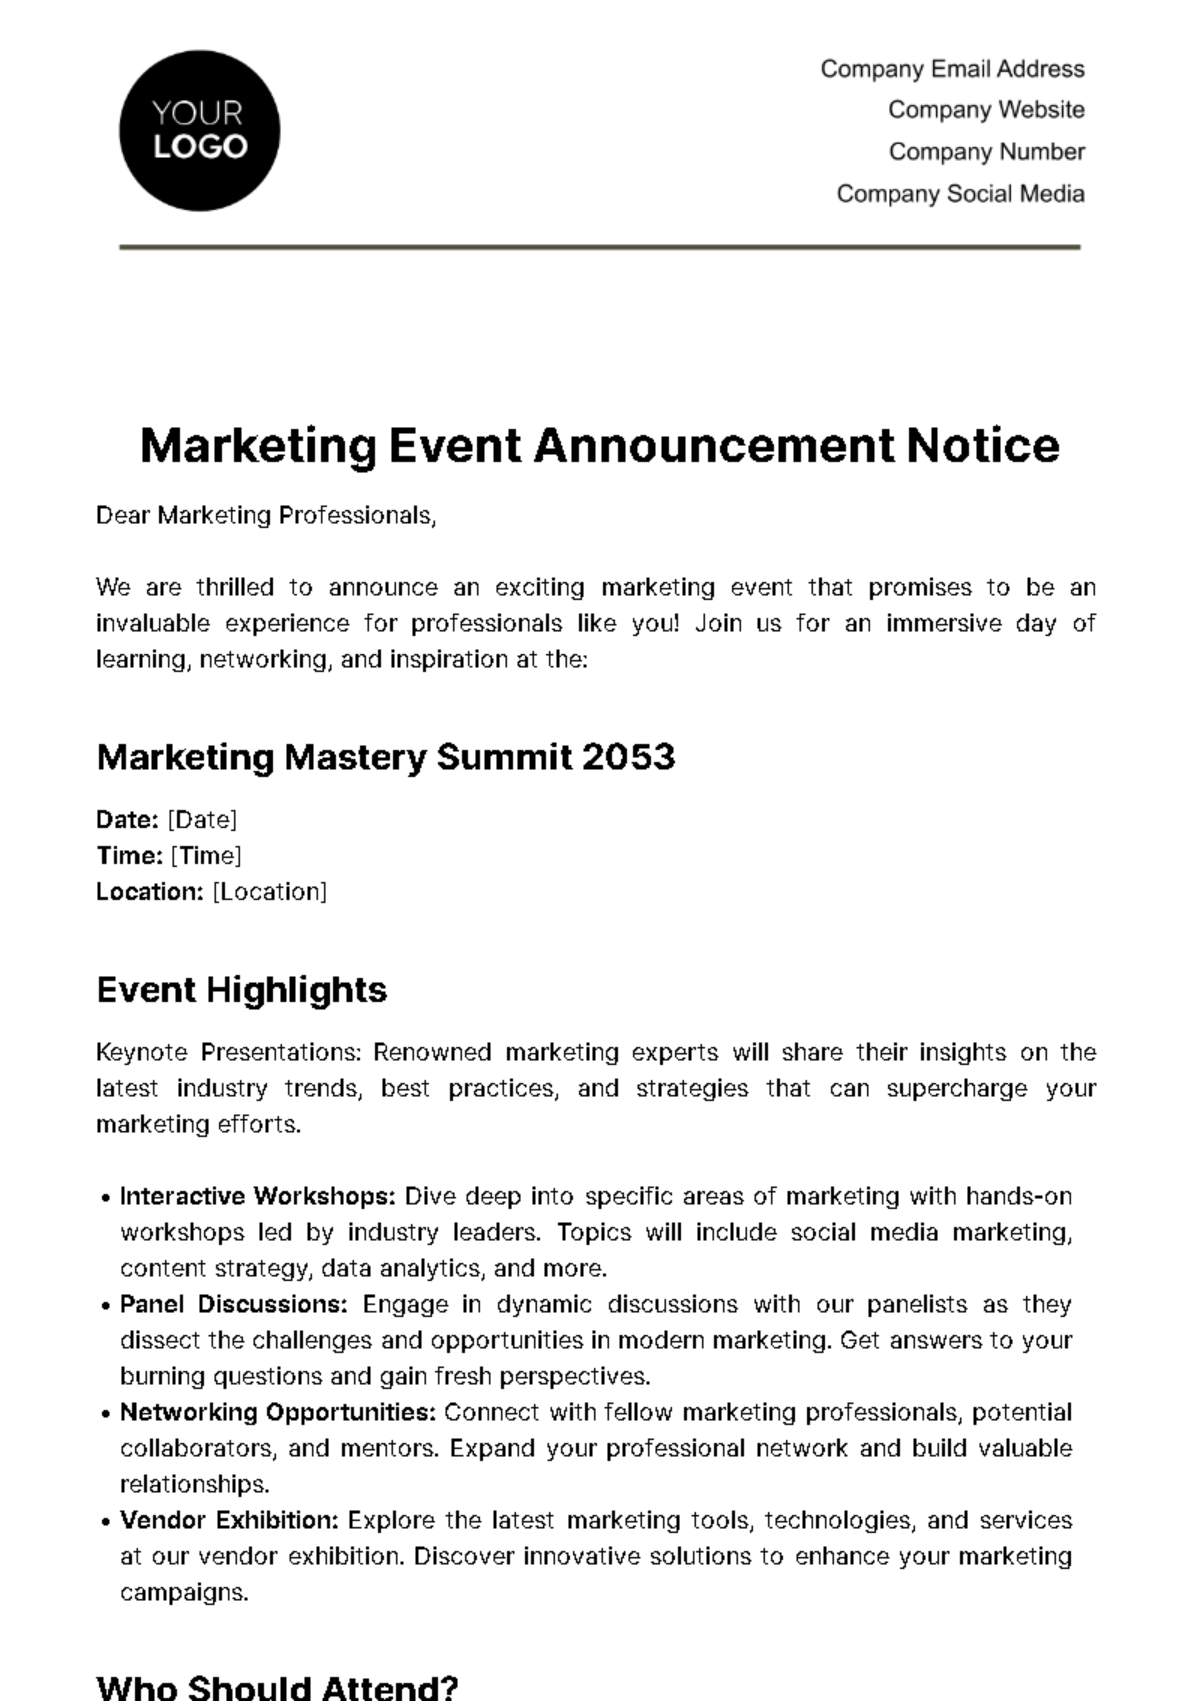 Free Marketing Event Announcement Notice Template